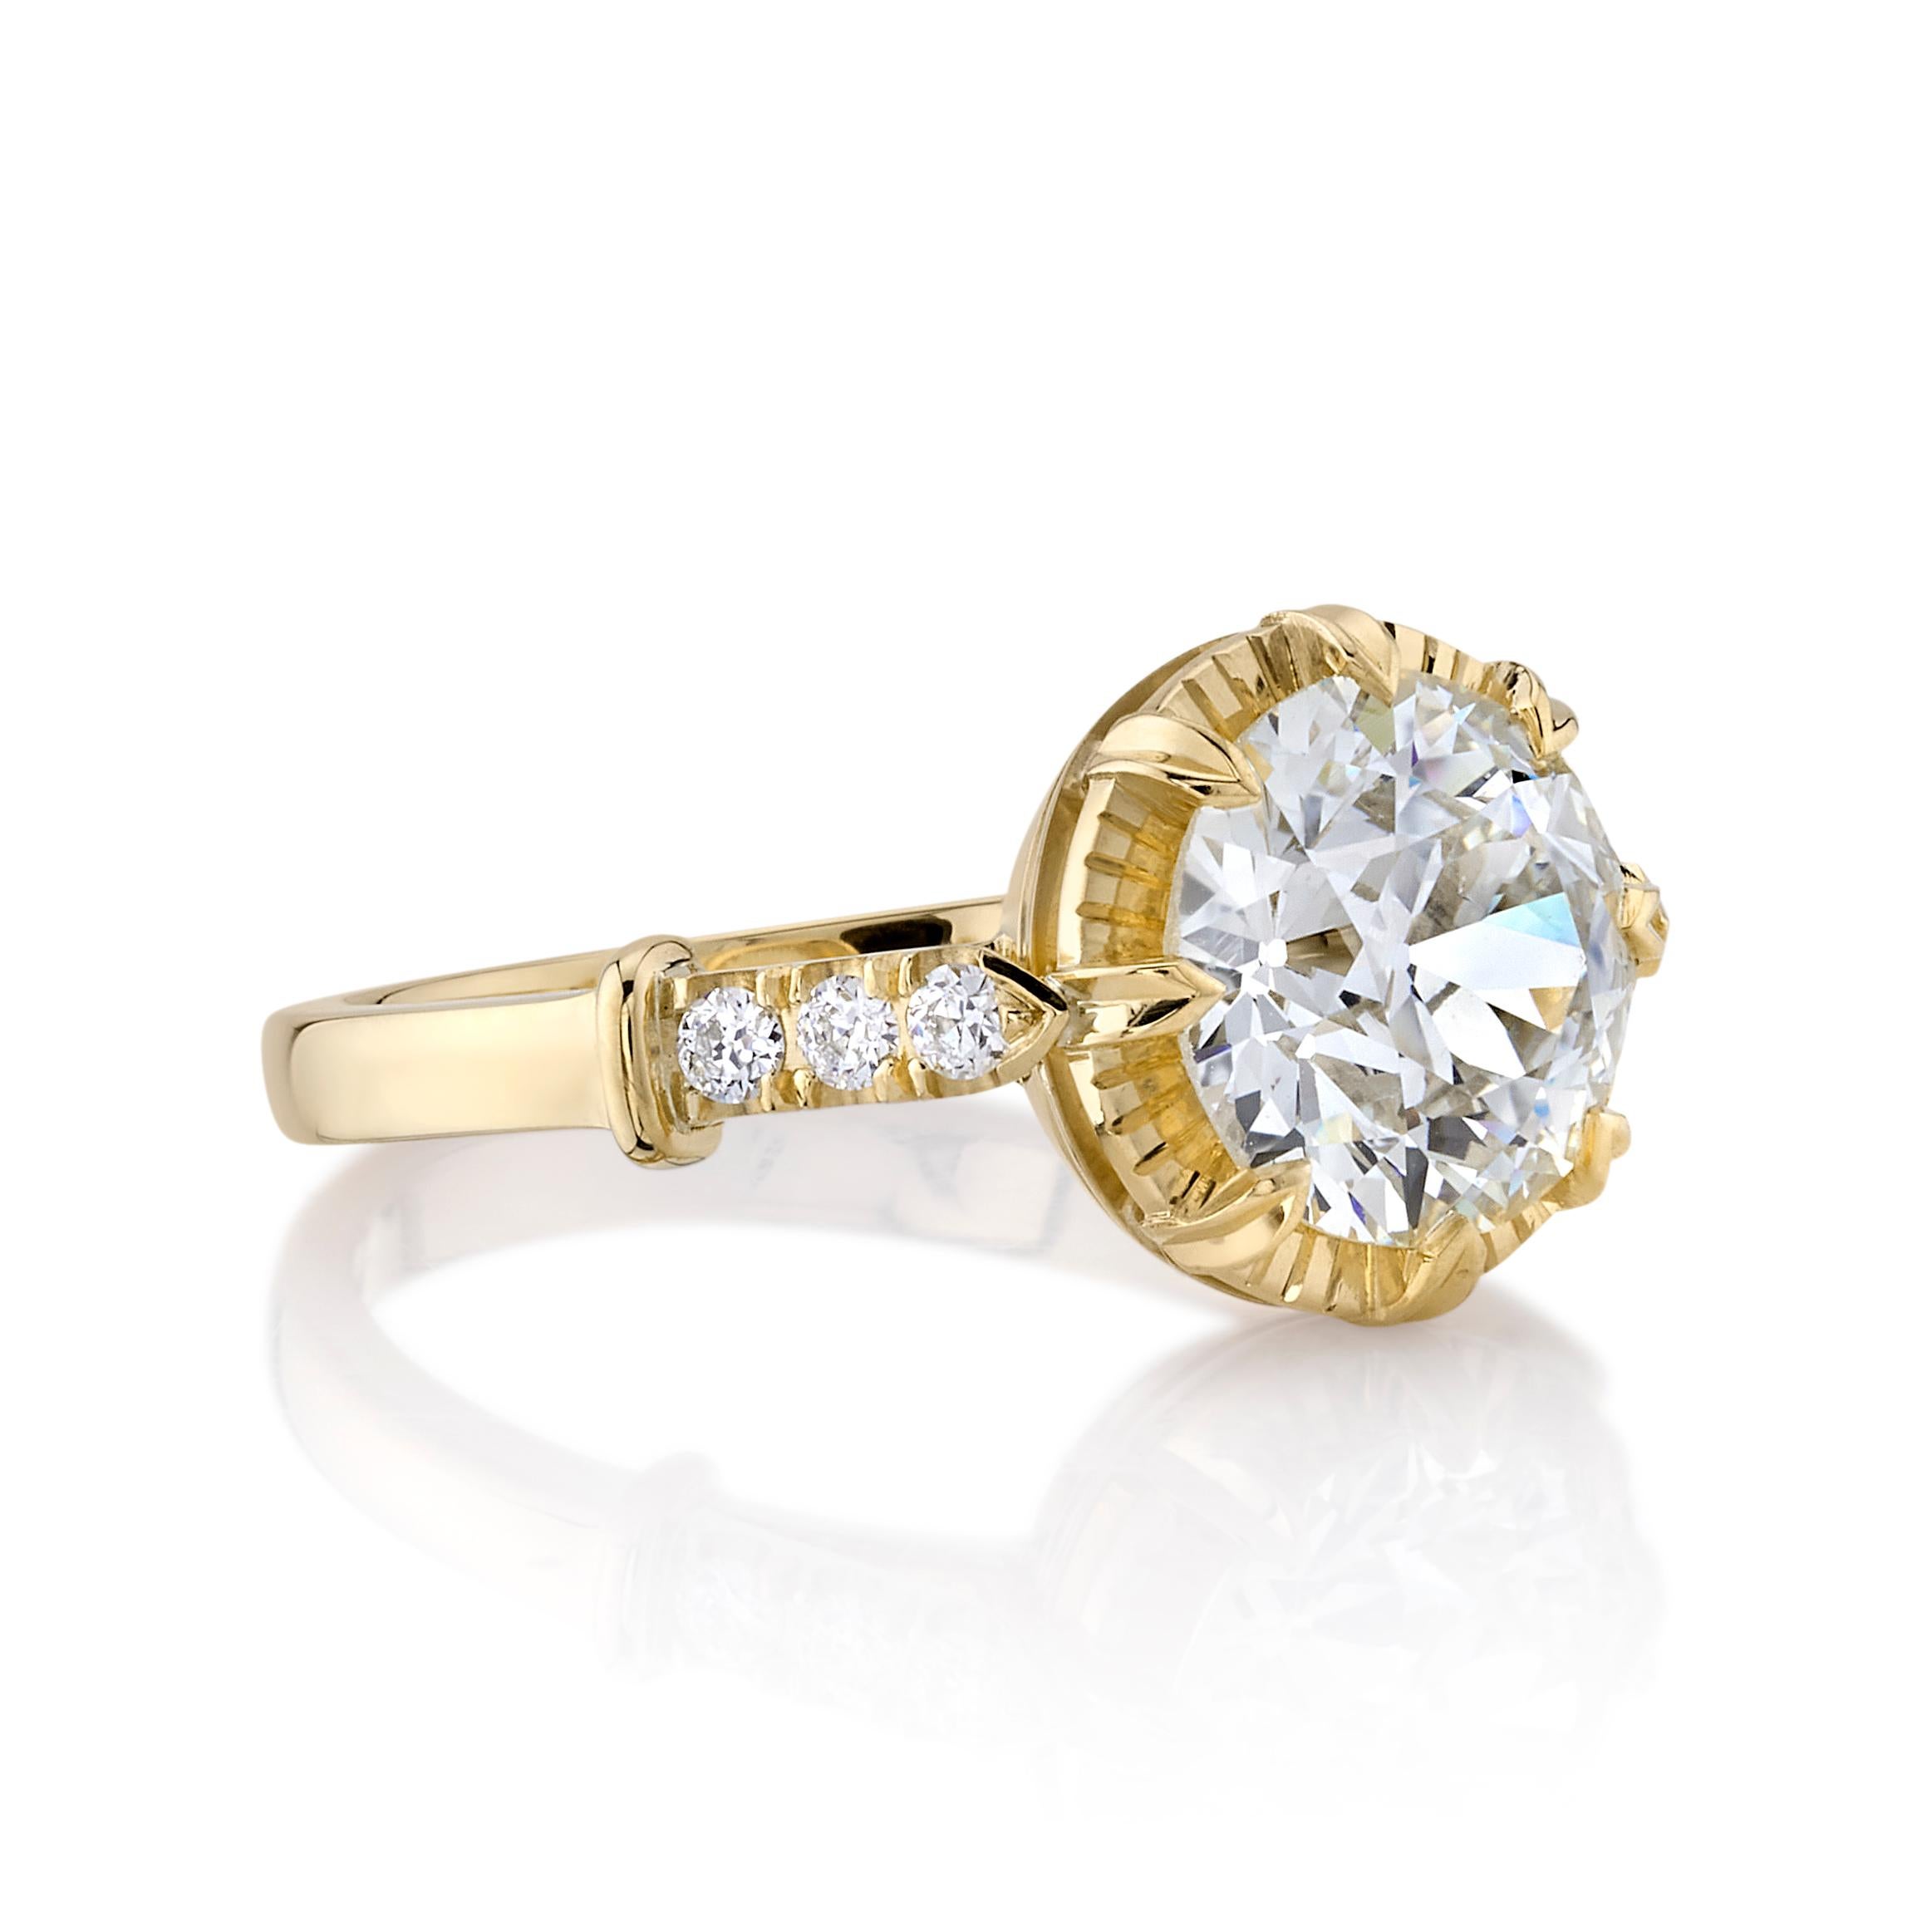 2.26ctw M/VS2 GIA certified old European cut diamond with 0.11ctw old European cut accent diamonds set in a handcrafted 18K yellow gold mounting.

Ring is currently a size 6 and can be sized to fit.